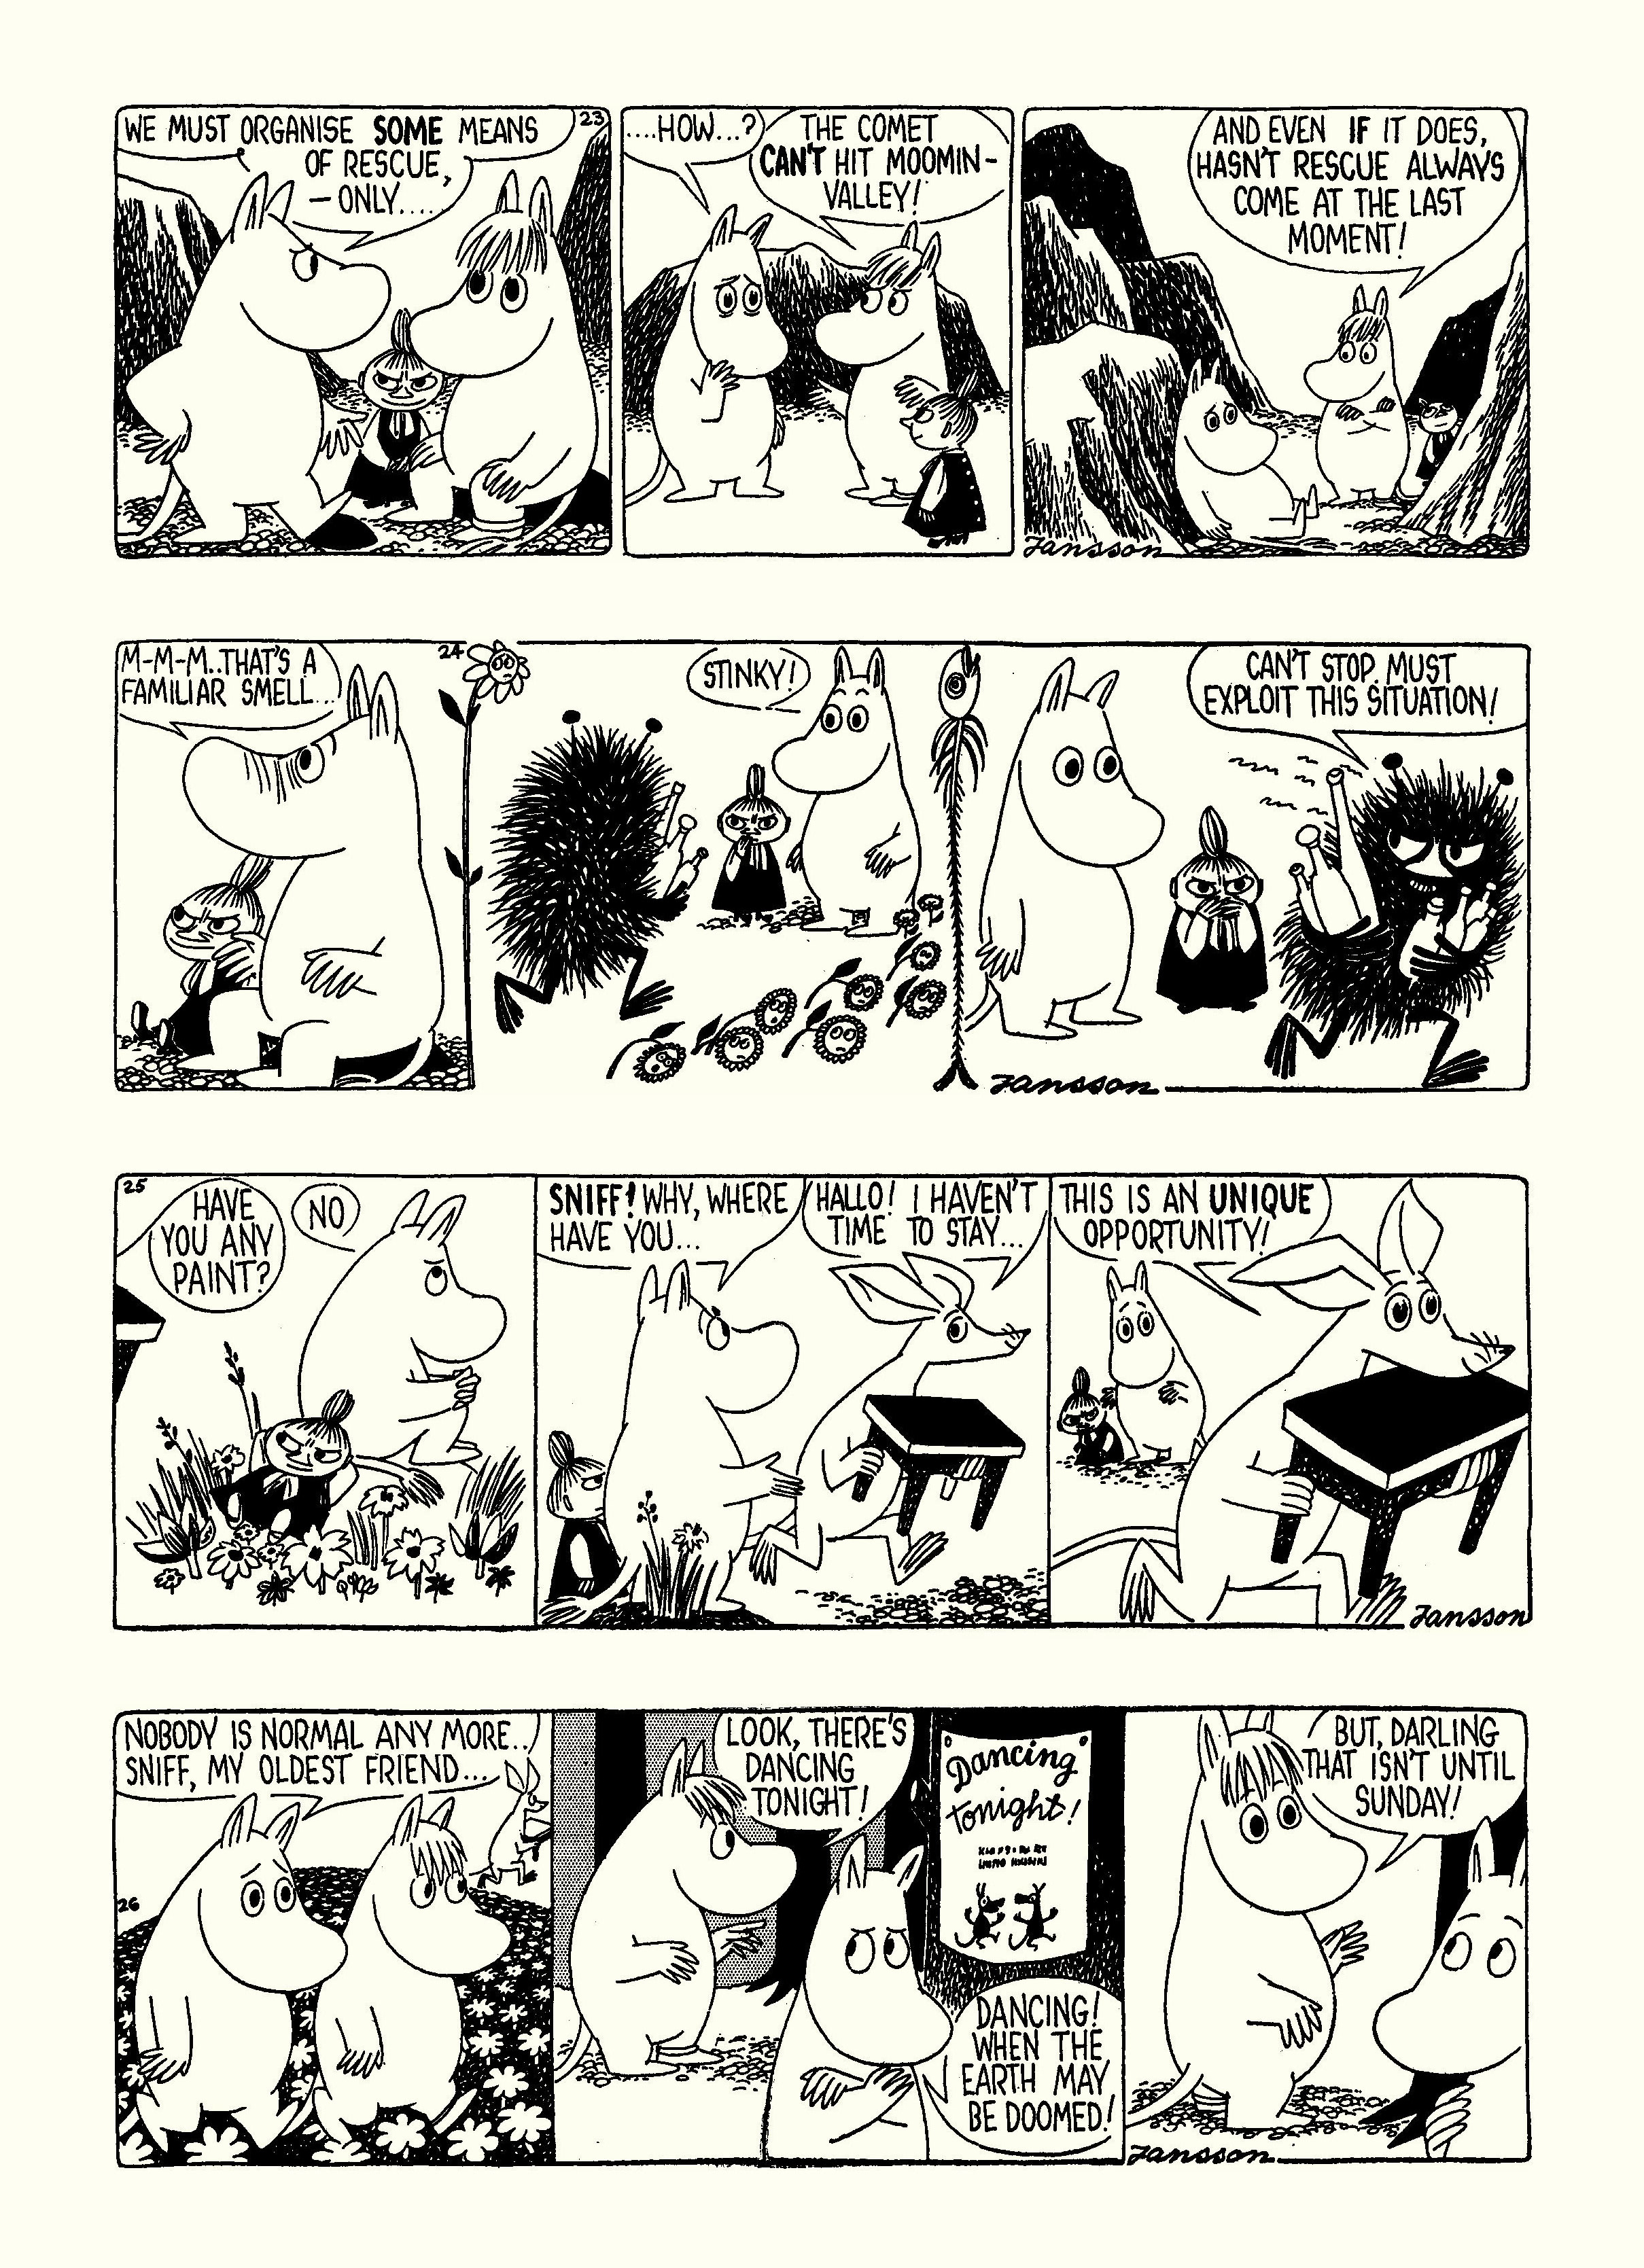 Read online Moomin: The Complete Tove Jansson Comic Strip comic -  Issue # TPB 4 - 64